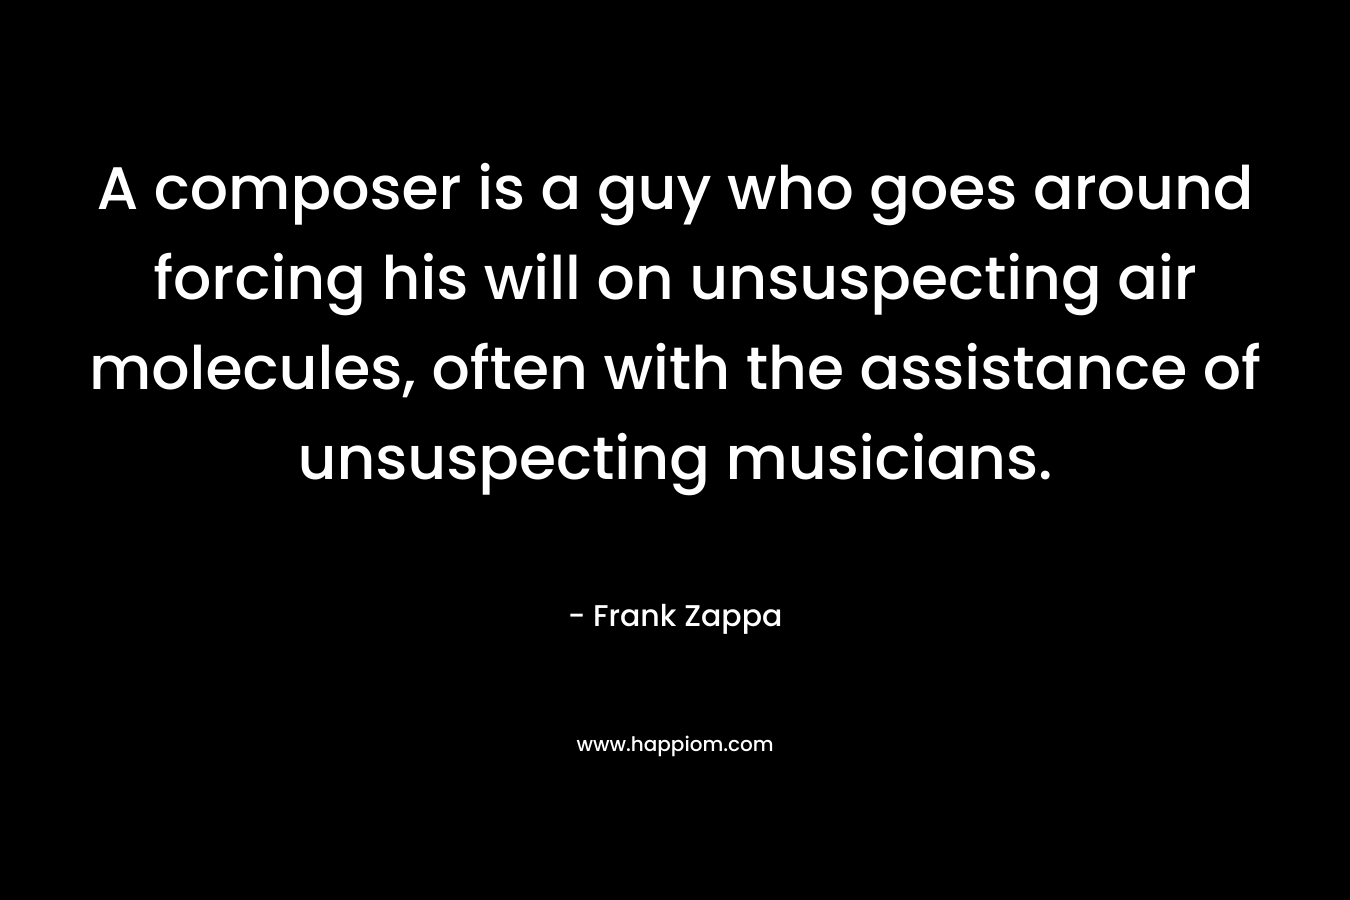 A composer is a guy who goes around forcing his will on unsuspecting air molecules, often with the assistance of unsuspecting musicians. – Frank Zappa